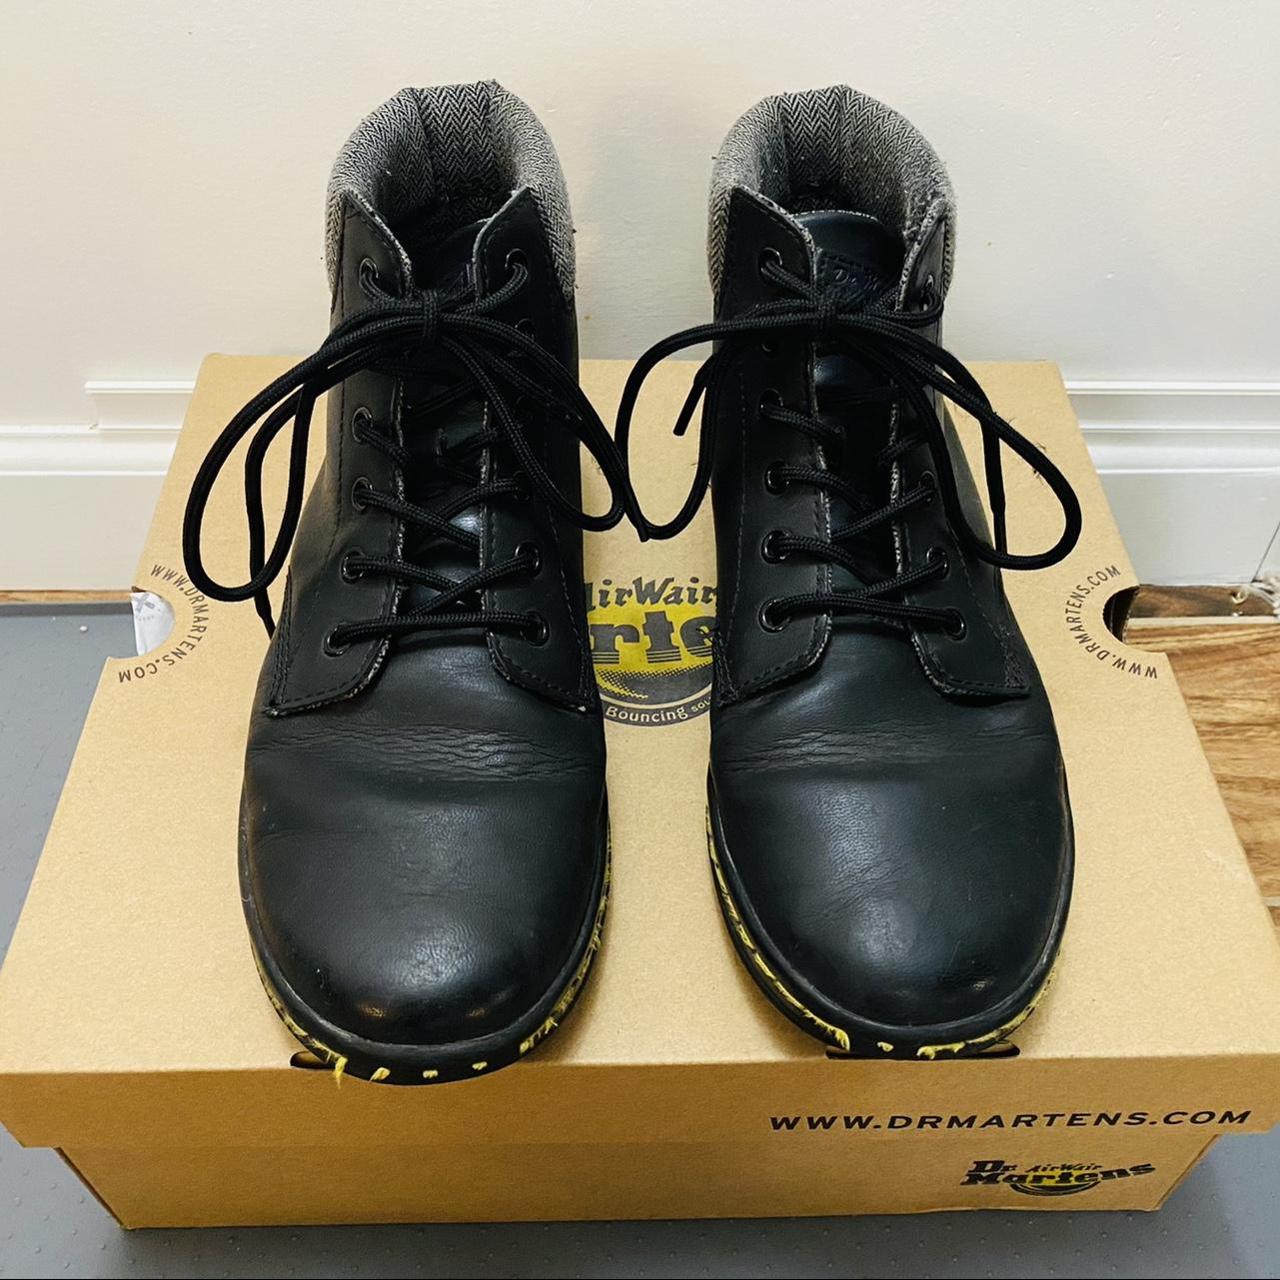 Dr. Martens Women's Black and Grey Boots